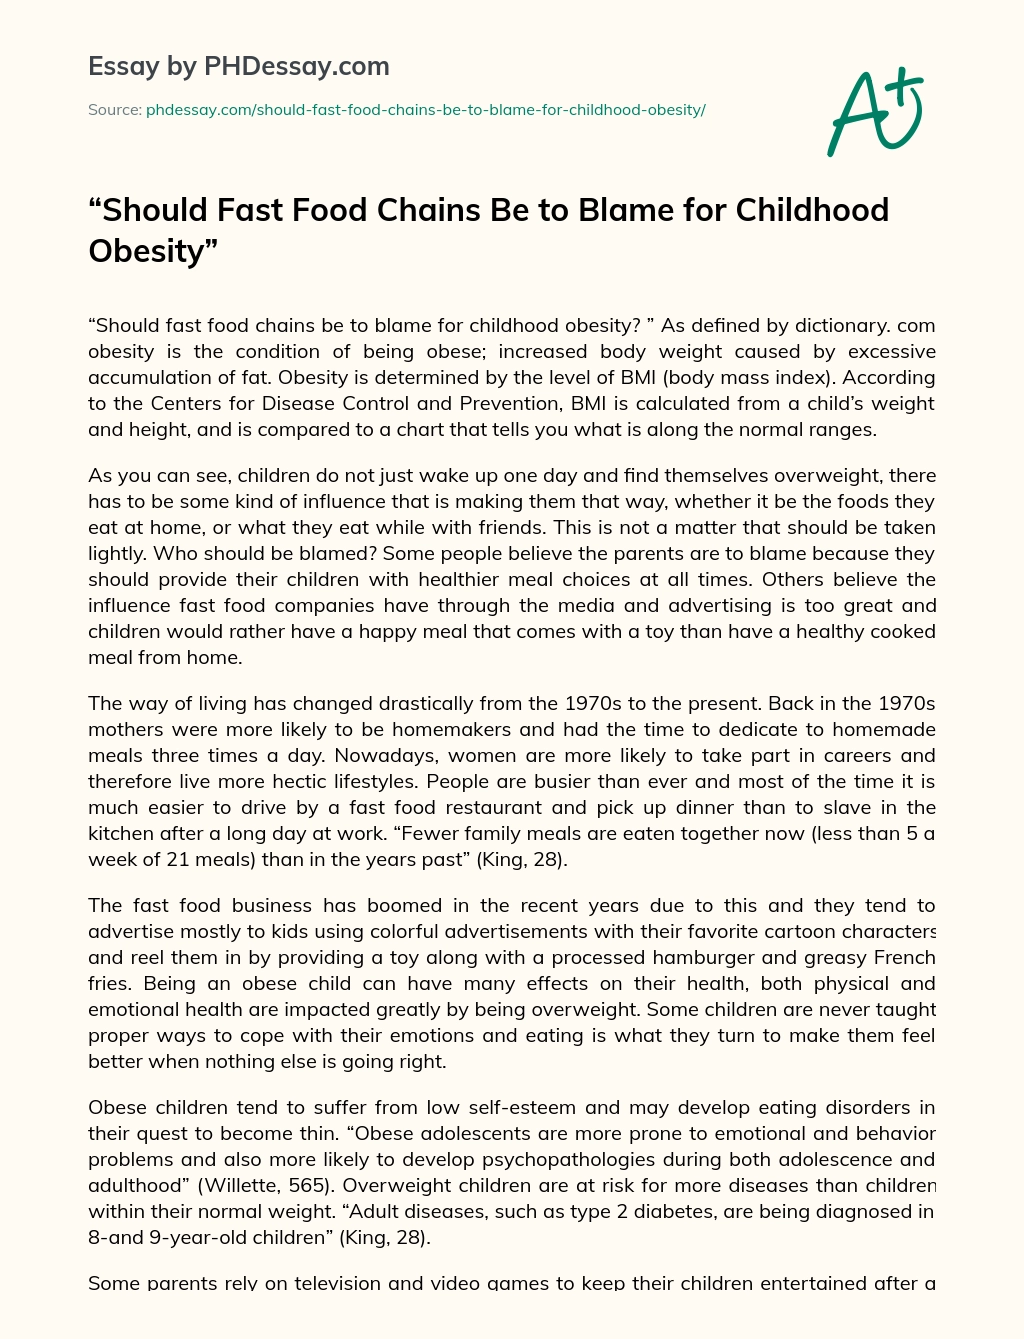 childhood obesity essay thesis